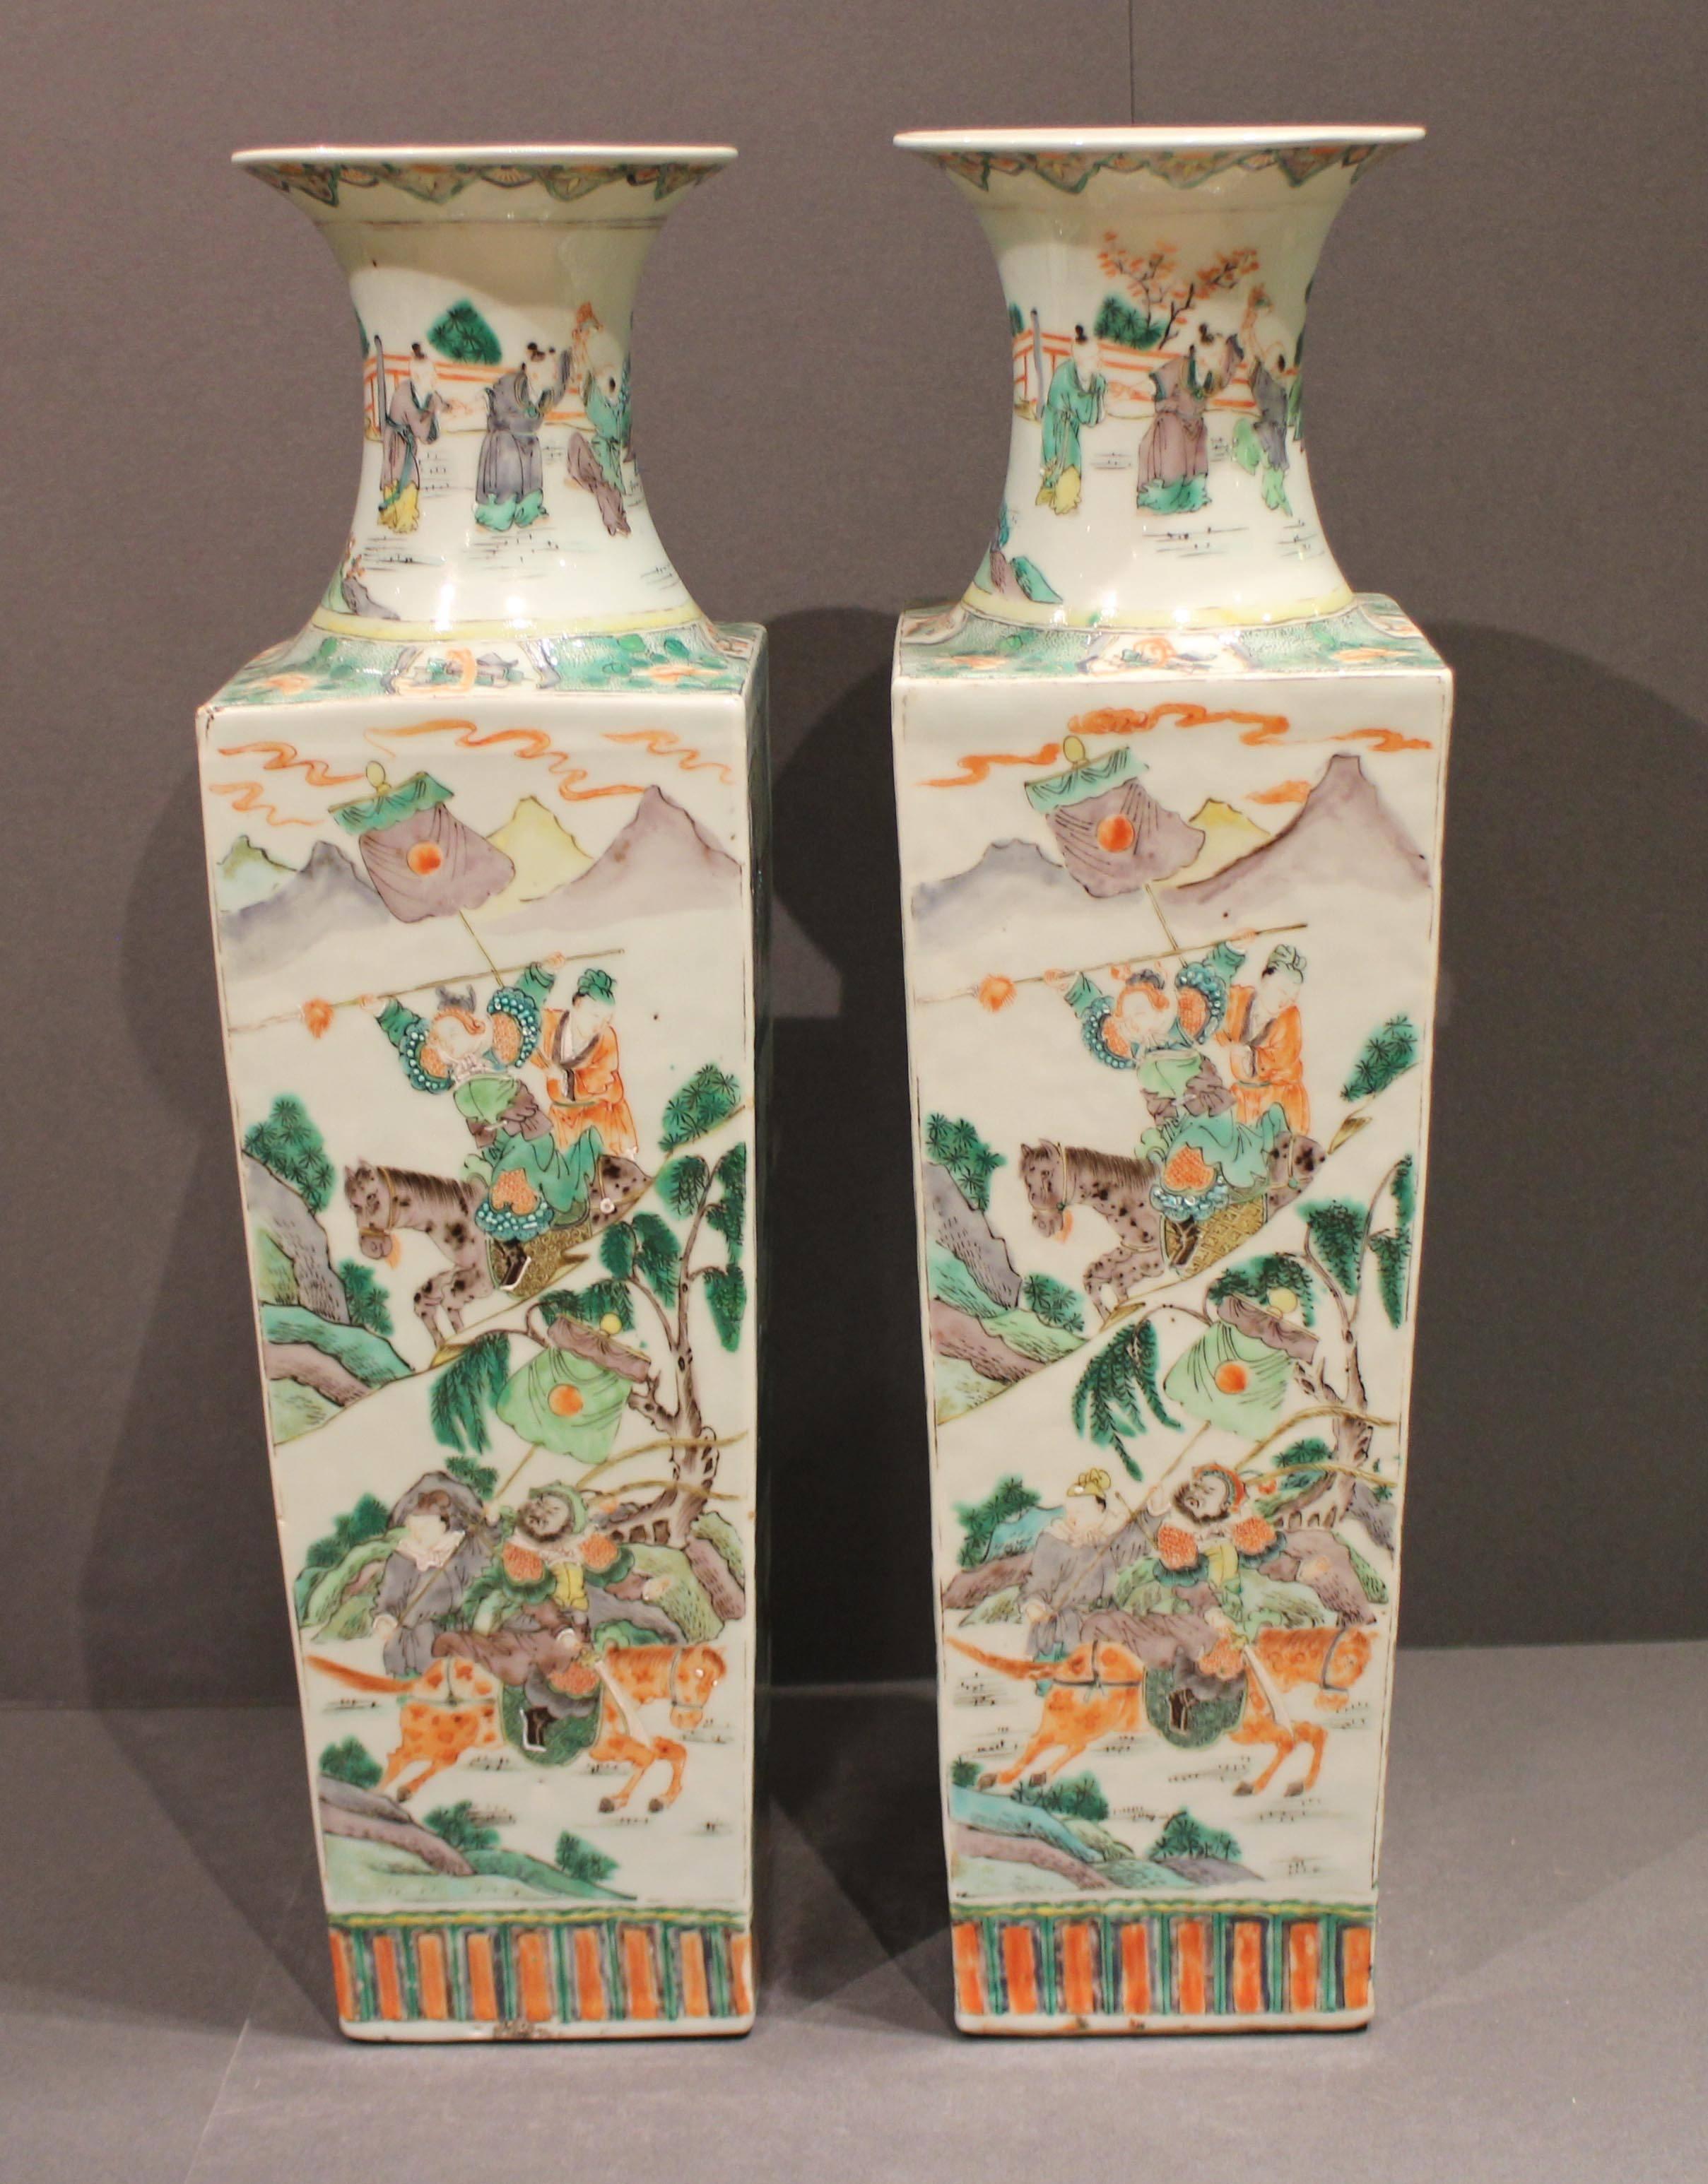 A pair of antique square shaped Chinese famille verte vases, decorated in delicate green, grey and orange with scenes including warriors fighting, a man training a dog and figures in interiors.